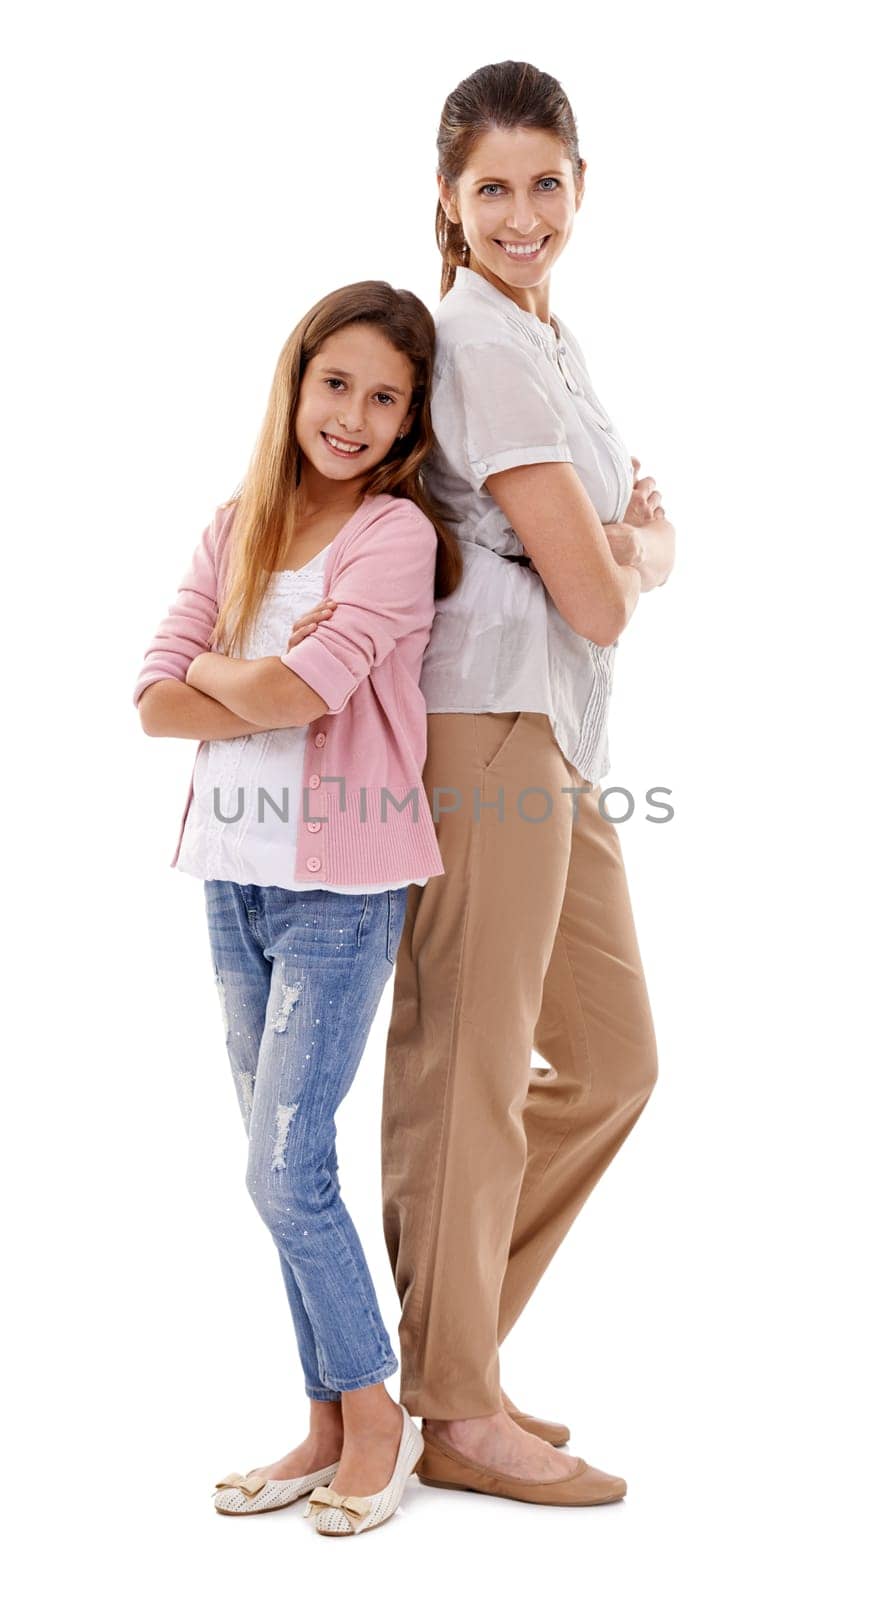 Happy, fashion and portrait of mother and child on white background for care, love and relationship. Family, smile and isolated mom with girl in casual style for bonding, support and proud in studio.